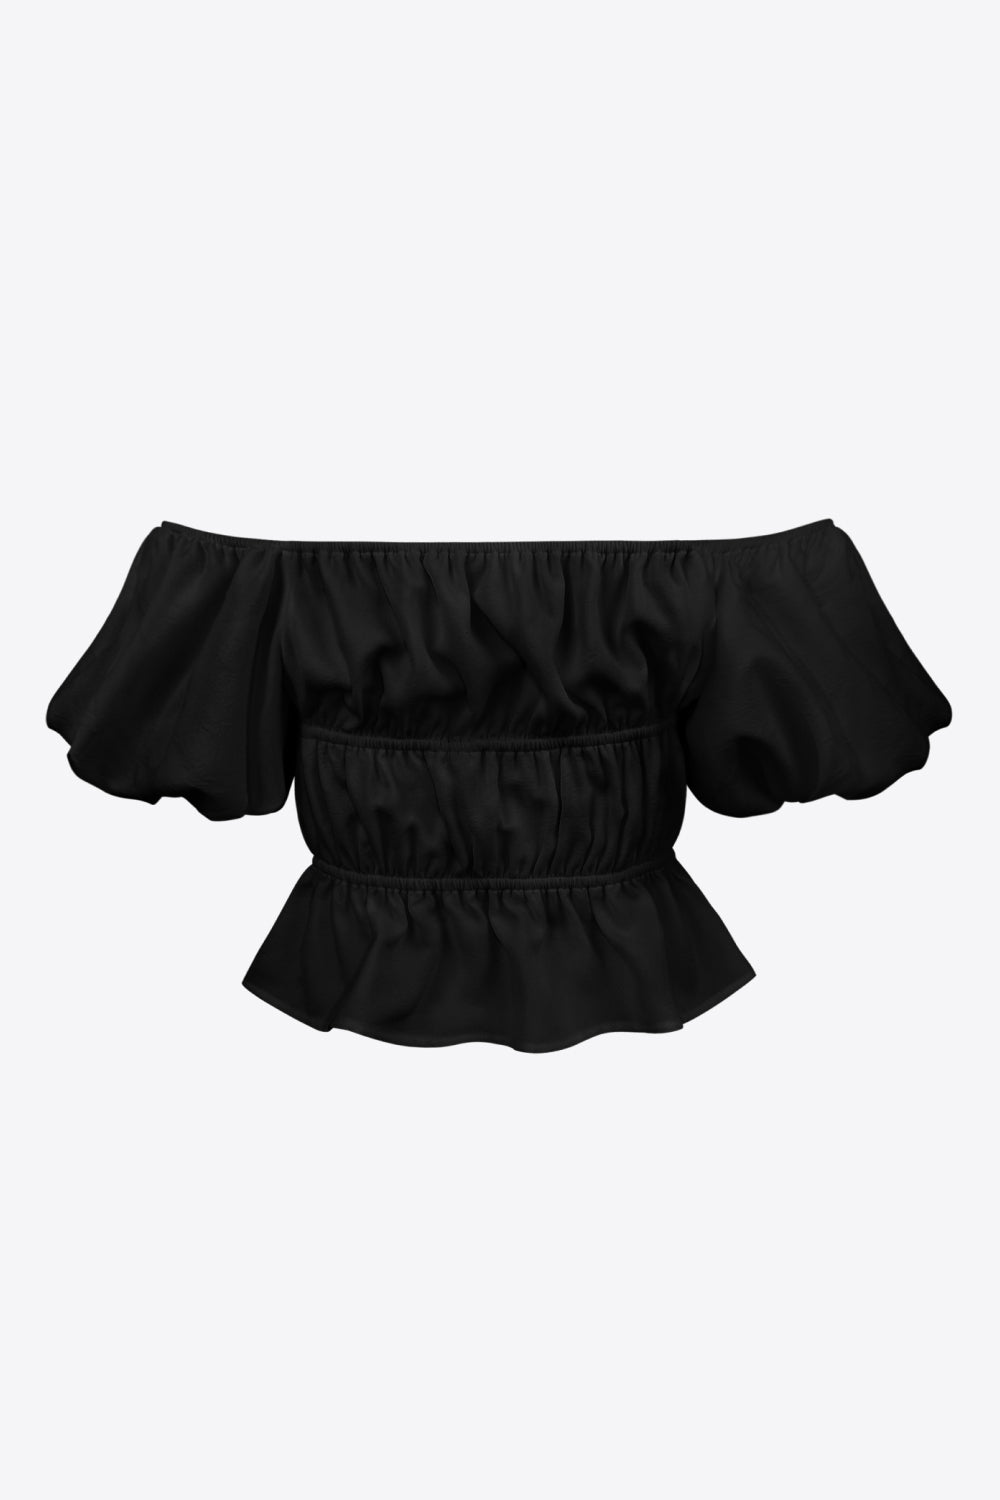 Appolonia Vintage Peasant Square Puff Sleeve Cropped Blouse | Black, White, Hot Pink, or Tan